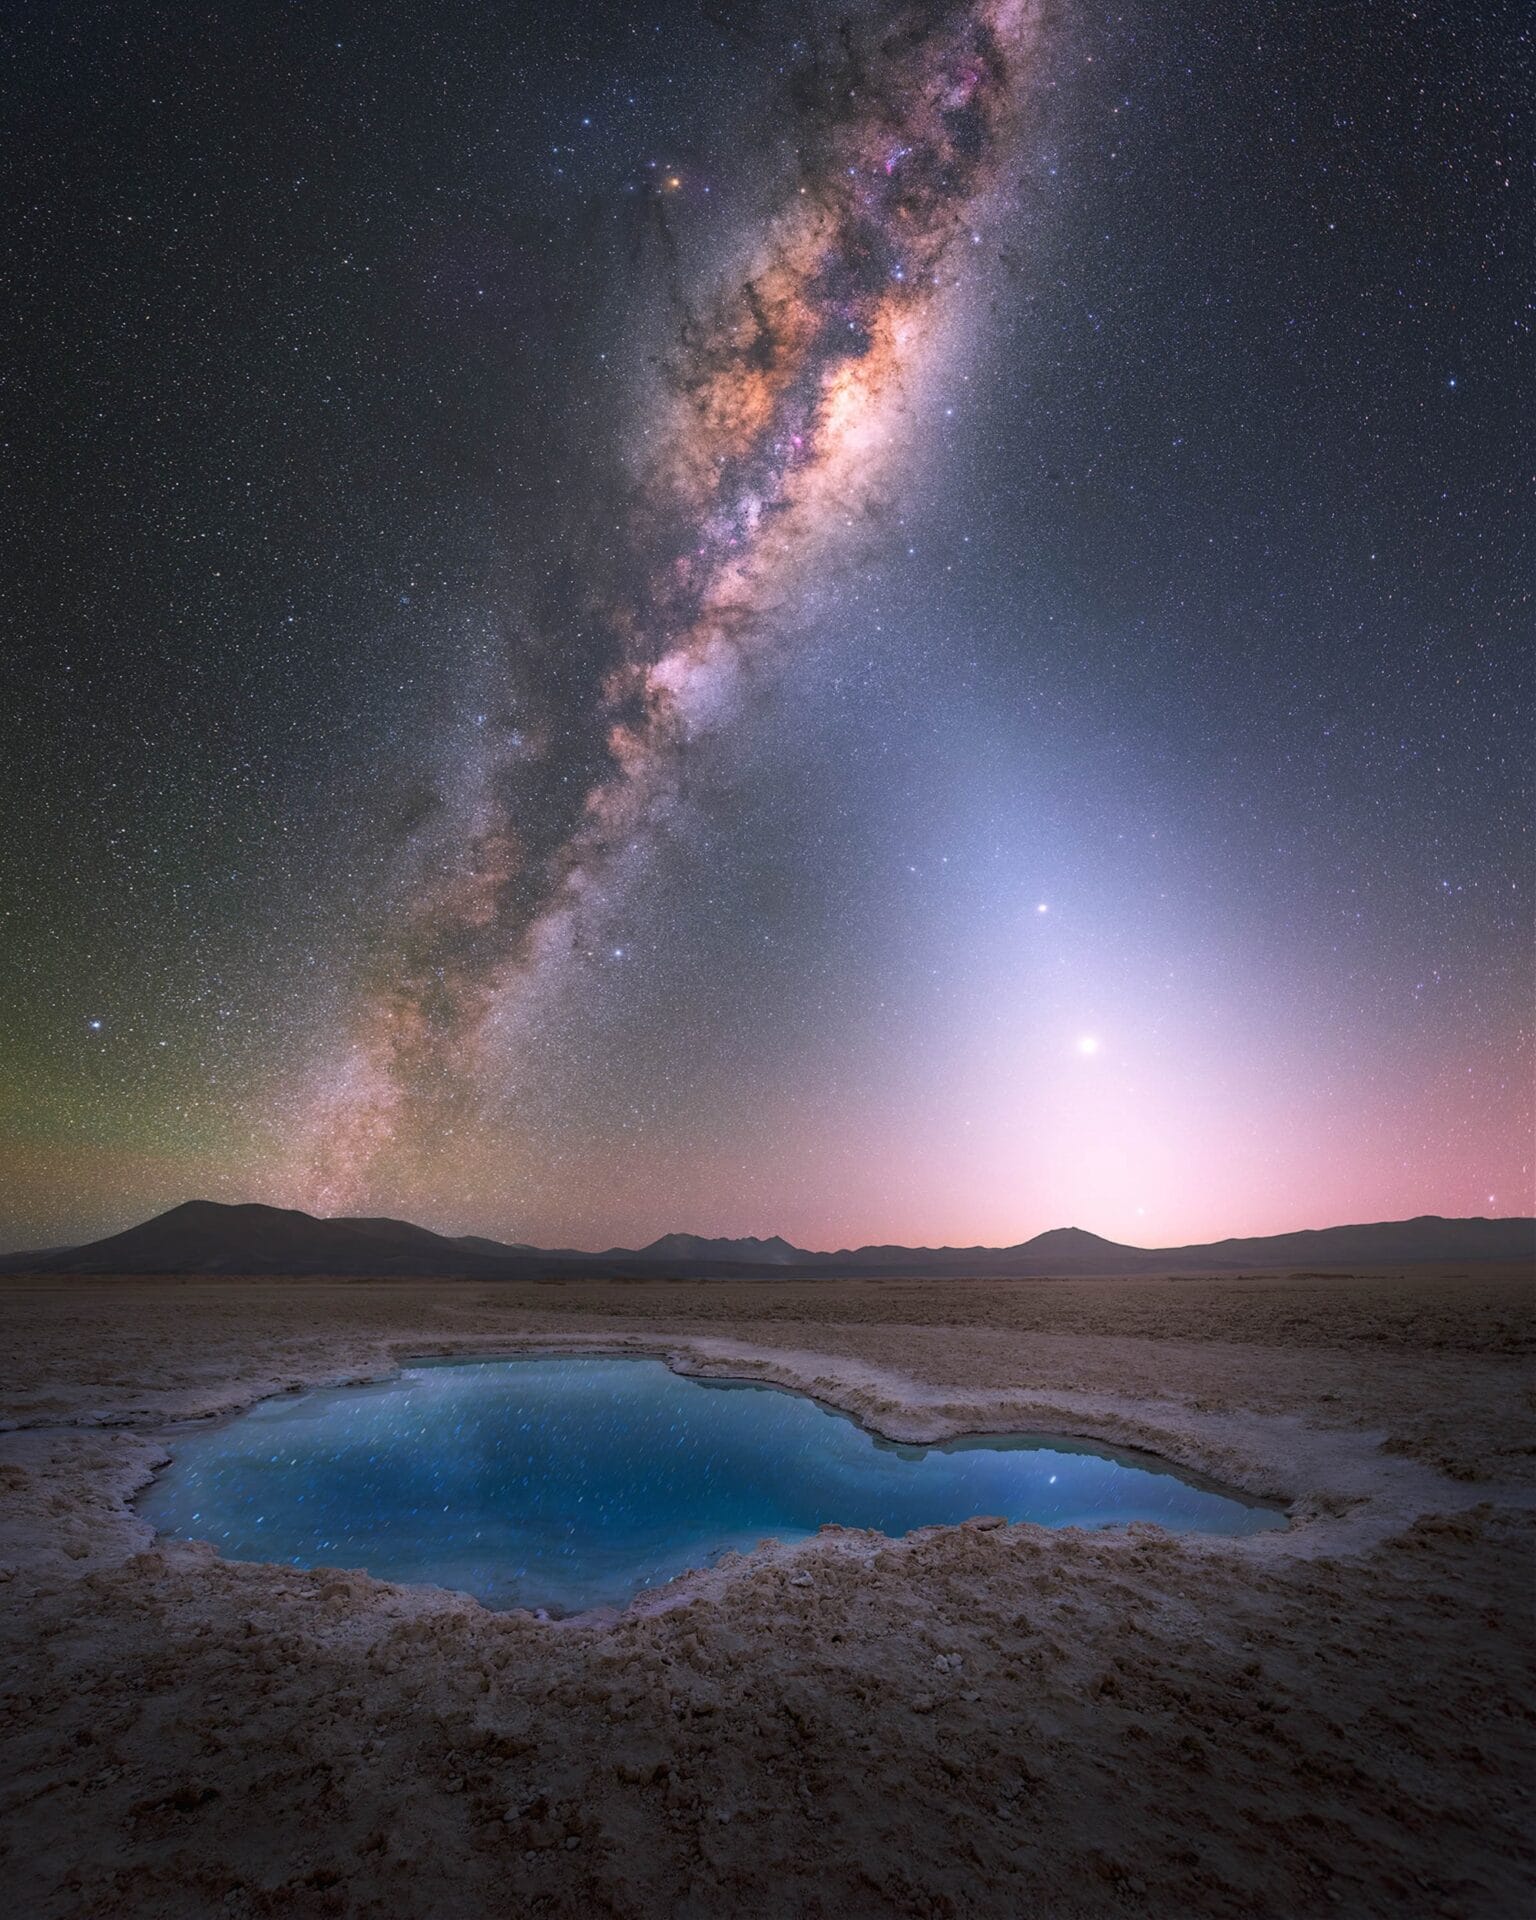 the brilliant star studded milky way above a lake with mountains in the background